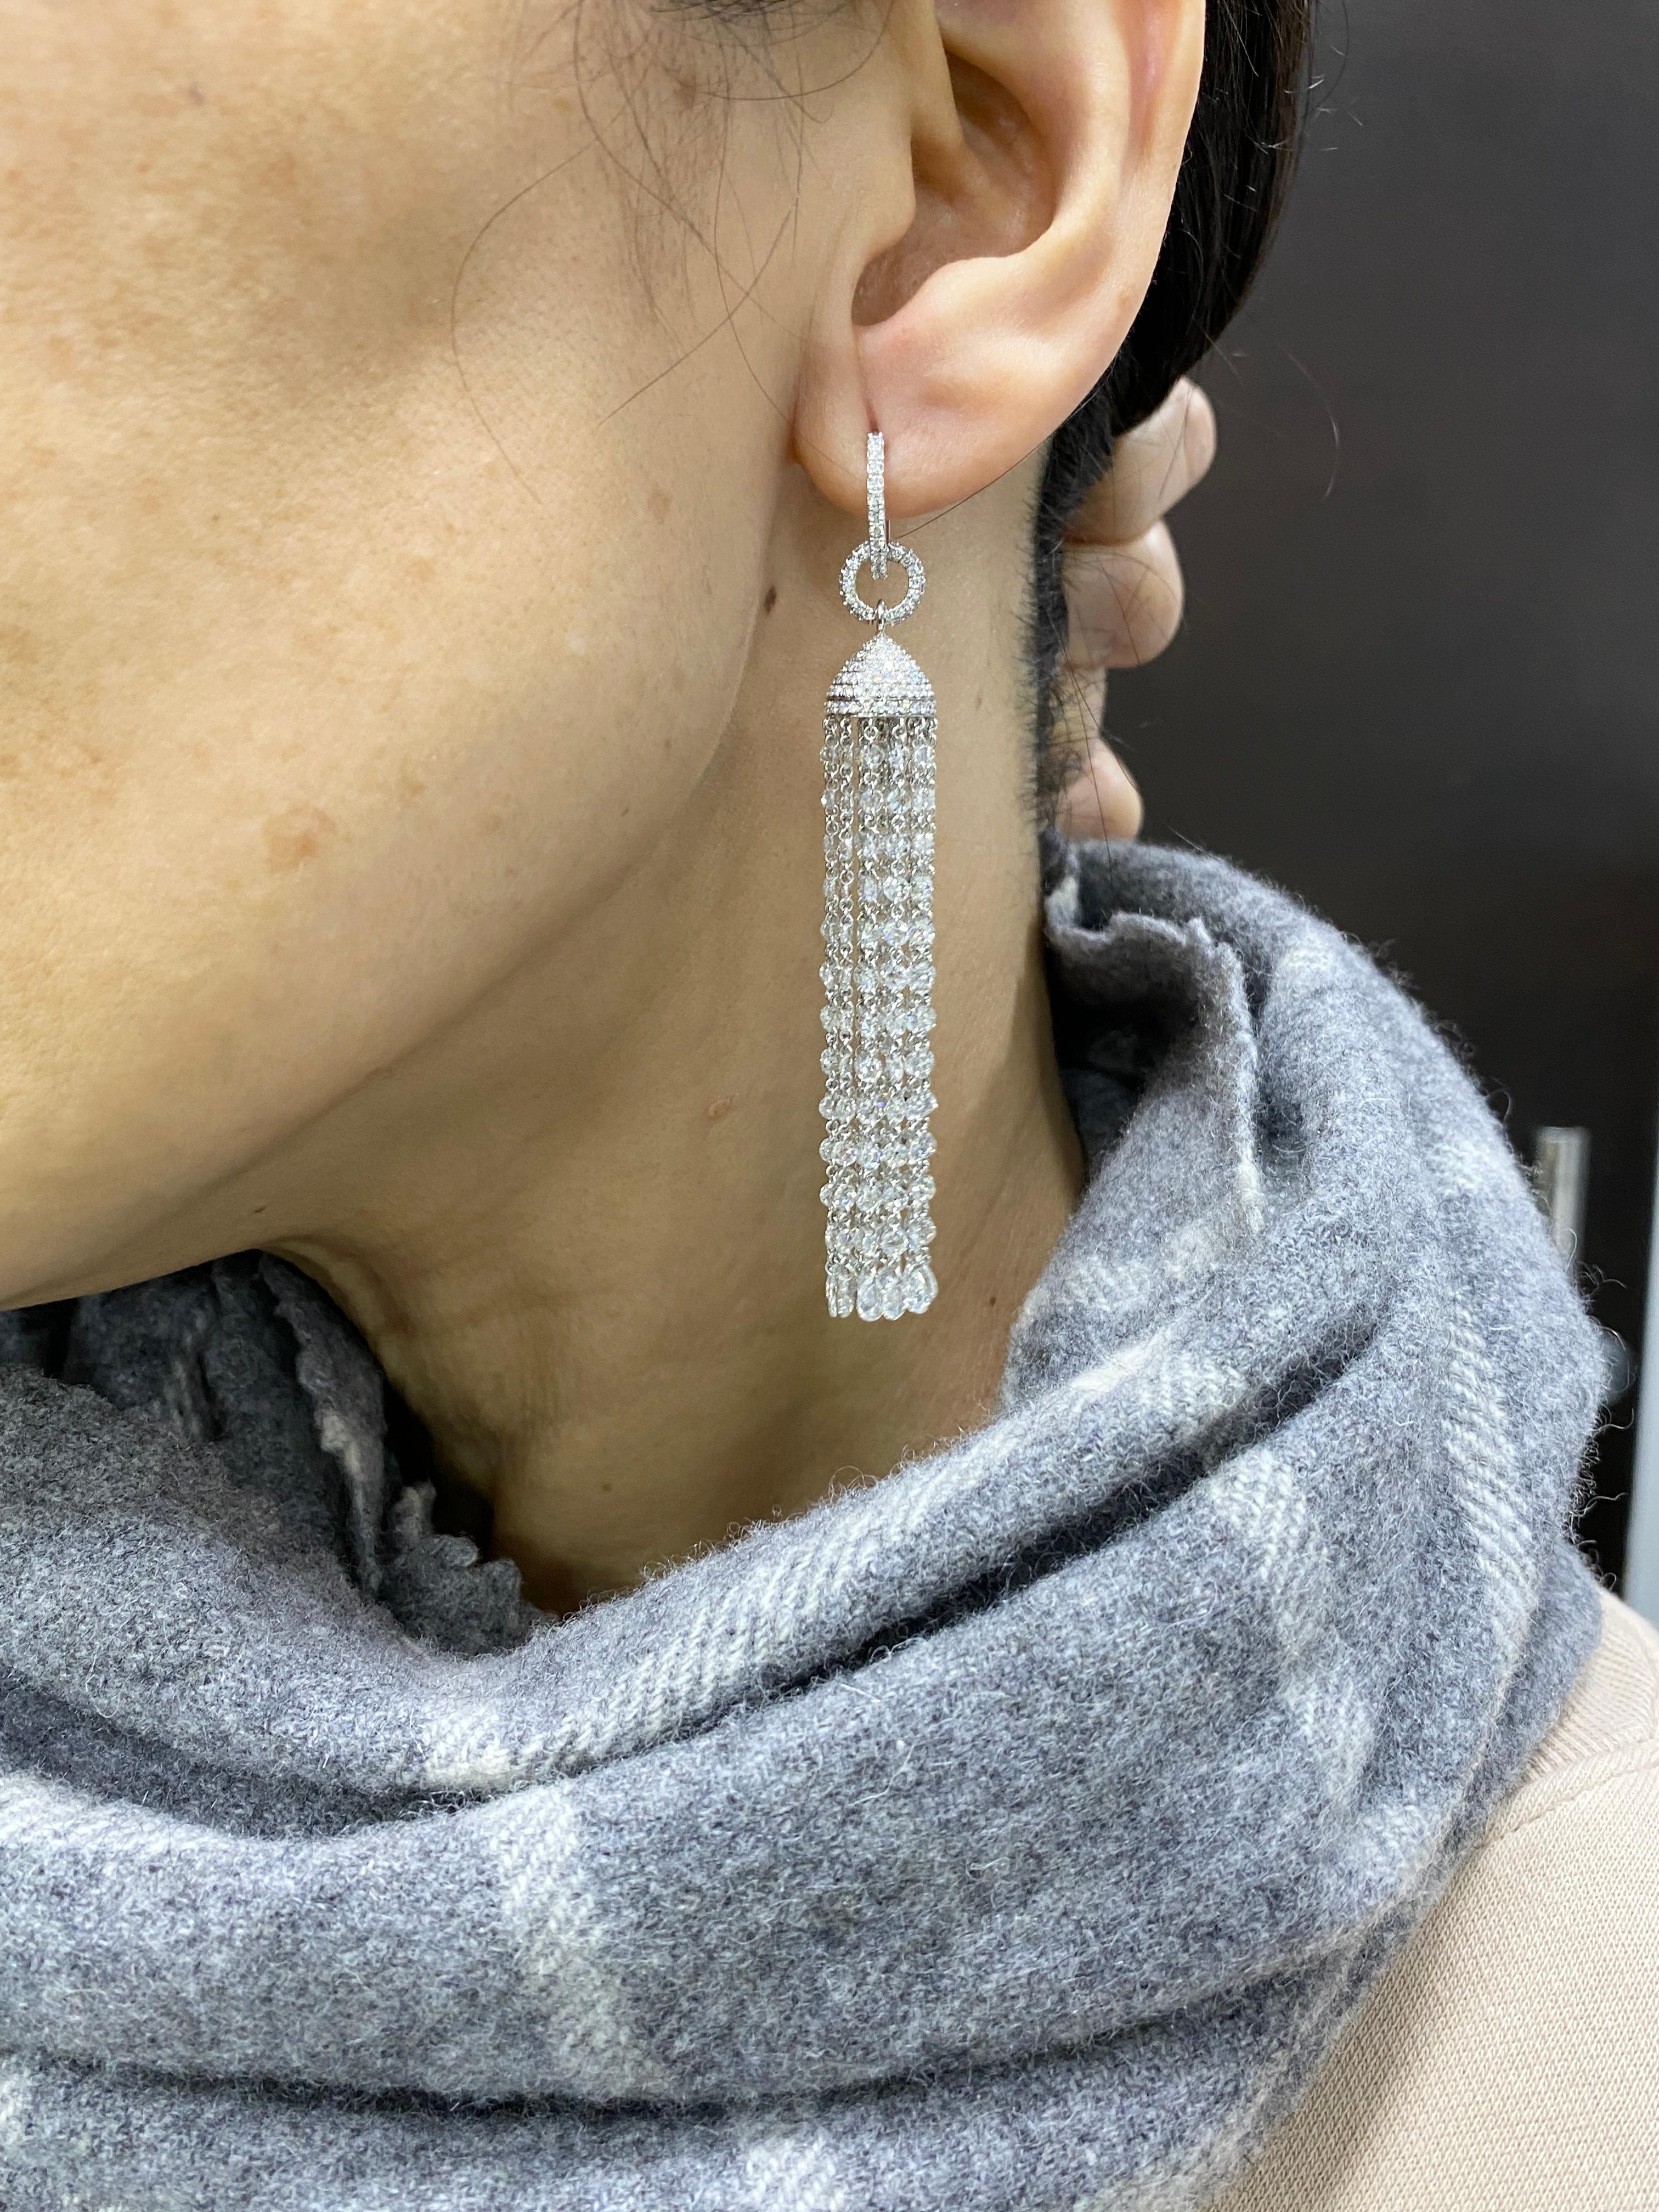 JR 19.10 Carat Rose Cut Diamond Tassel 18 Karat White Gold Earring

Stylish, graceful and elegant is what this set of diamond tassel earring is. It moves with sheer grace and is made using excellent craftsmanship.

Diamond Weight : 19.10